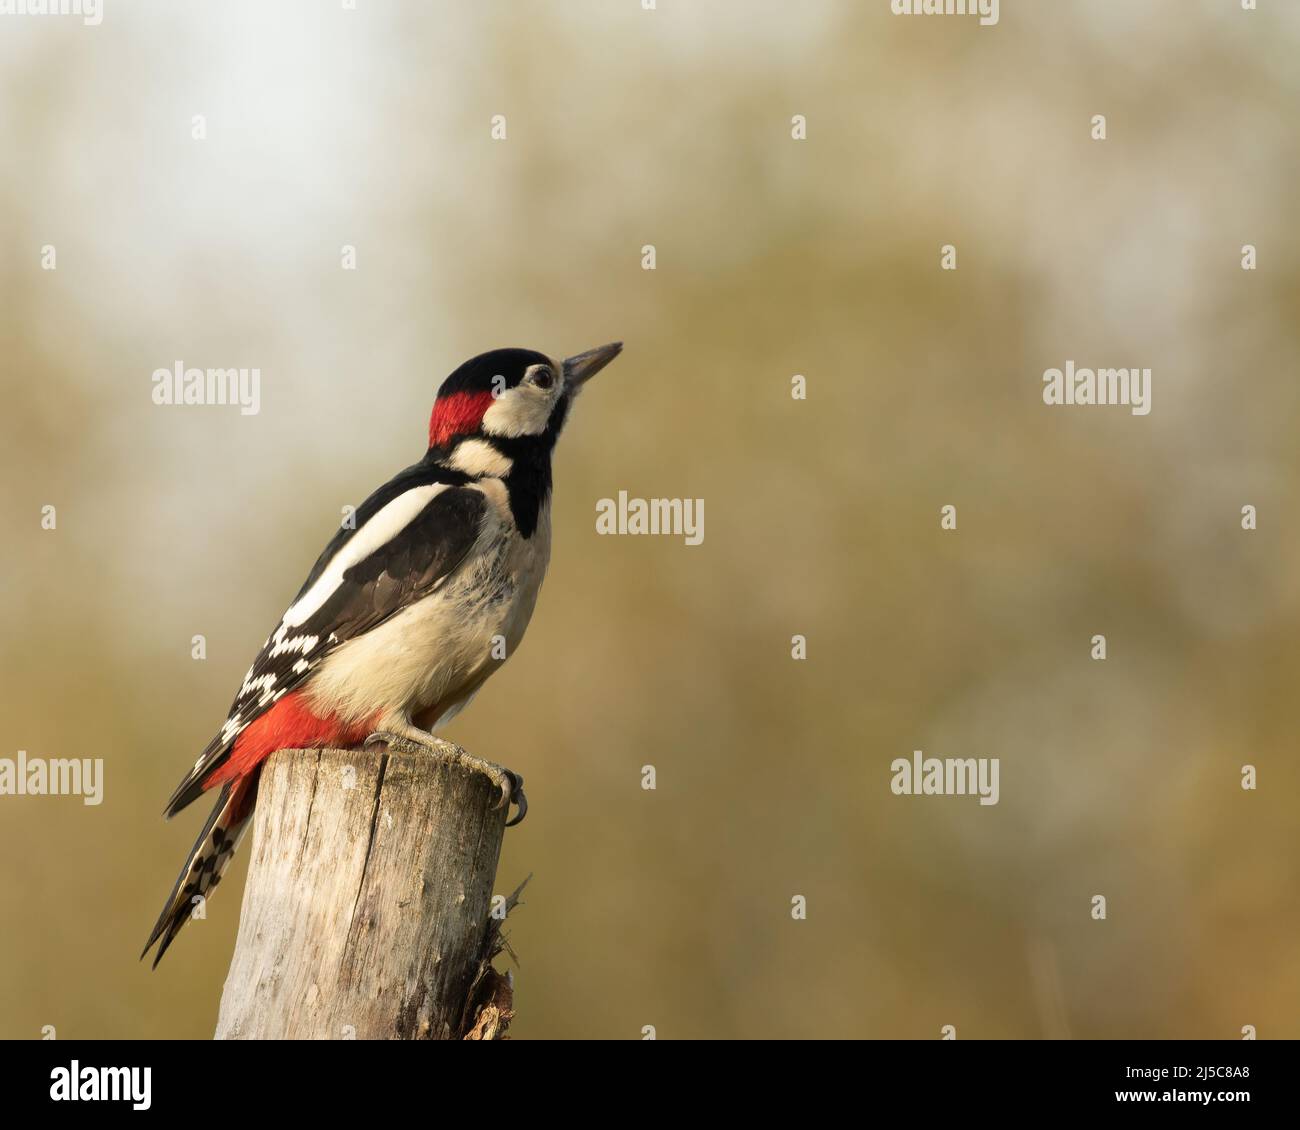 Great Spotted Woodpecker, Dendrocopos major,  perched on top of wooden post with copy space on blurred woodland background Stock Photo